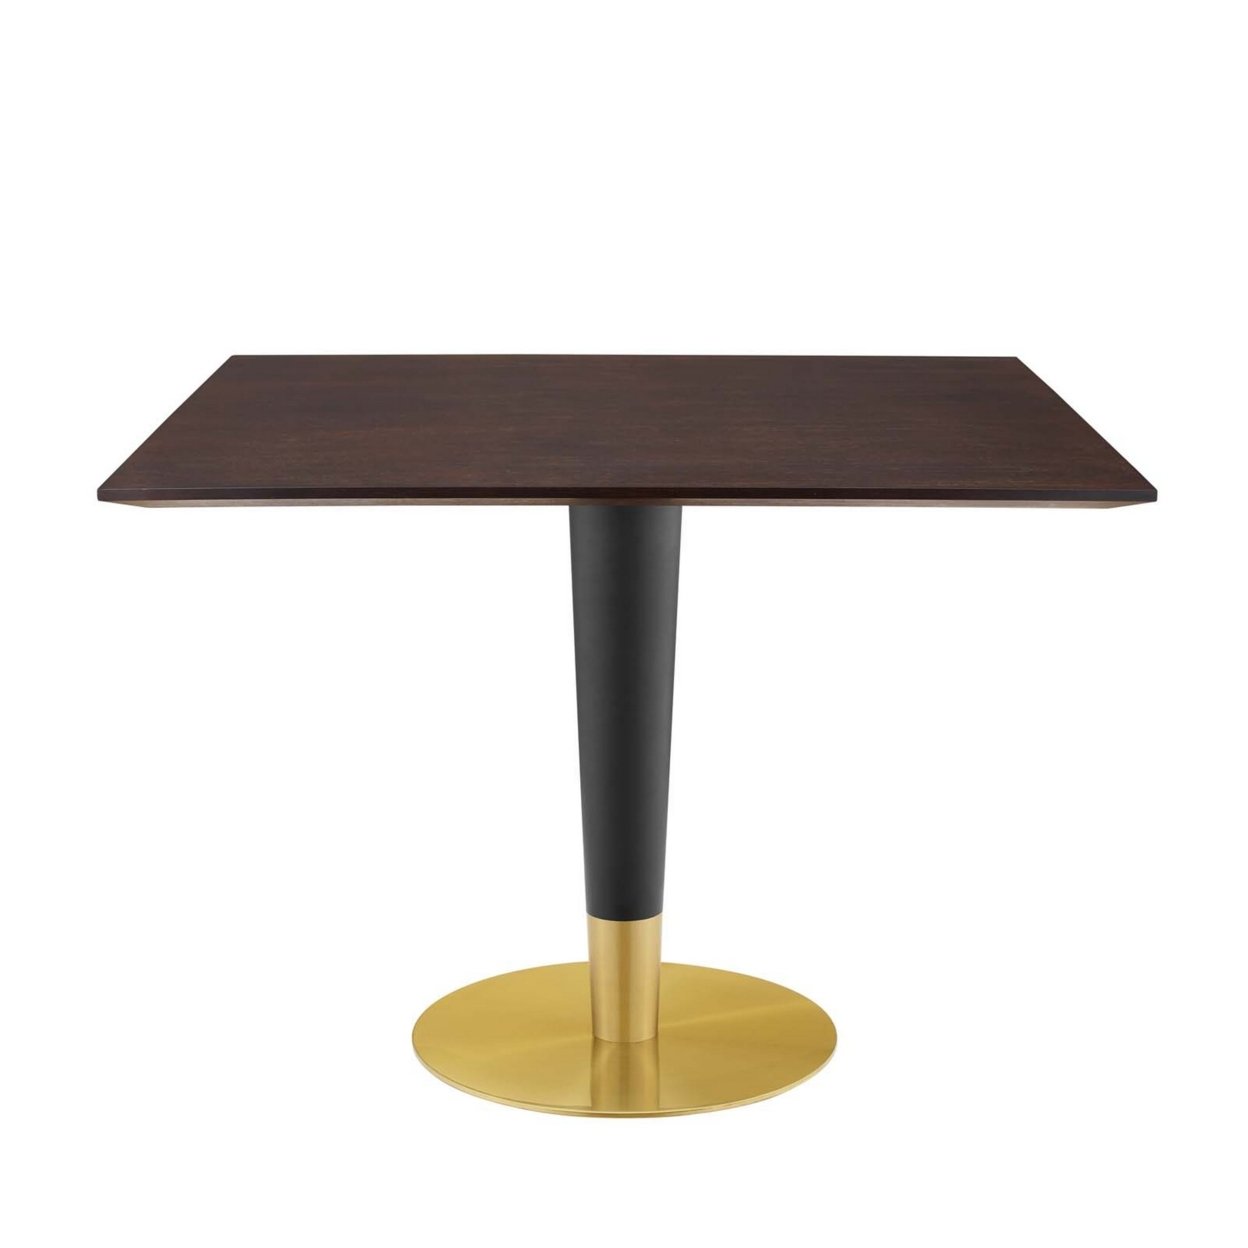 Zinque 40 Square Dining Table, Gold Cherry Walnut